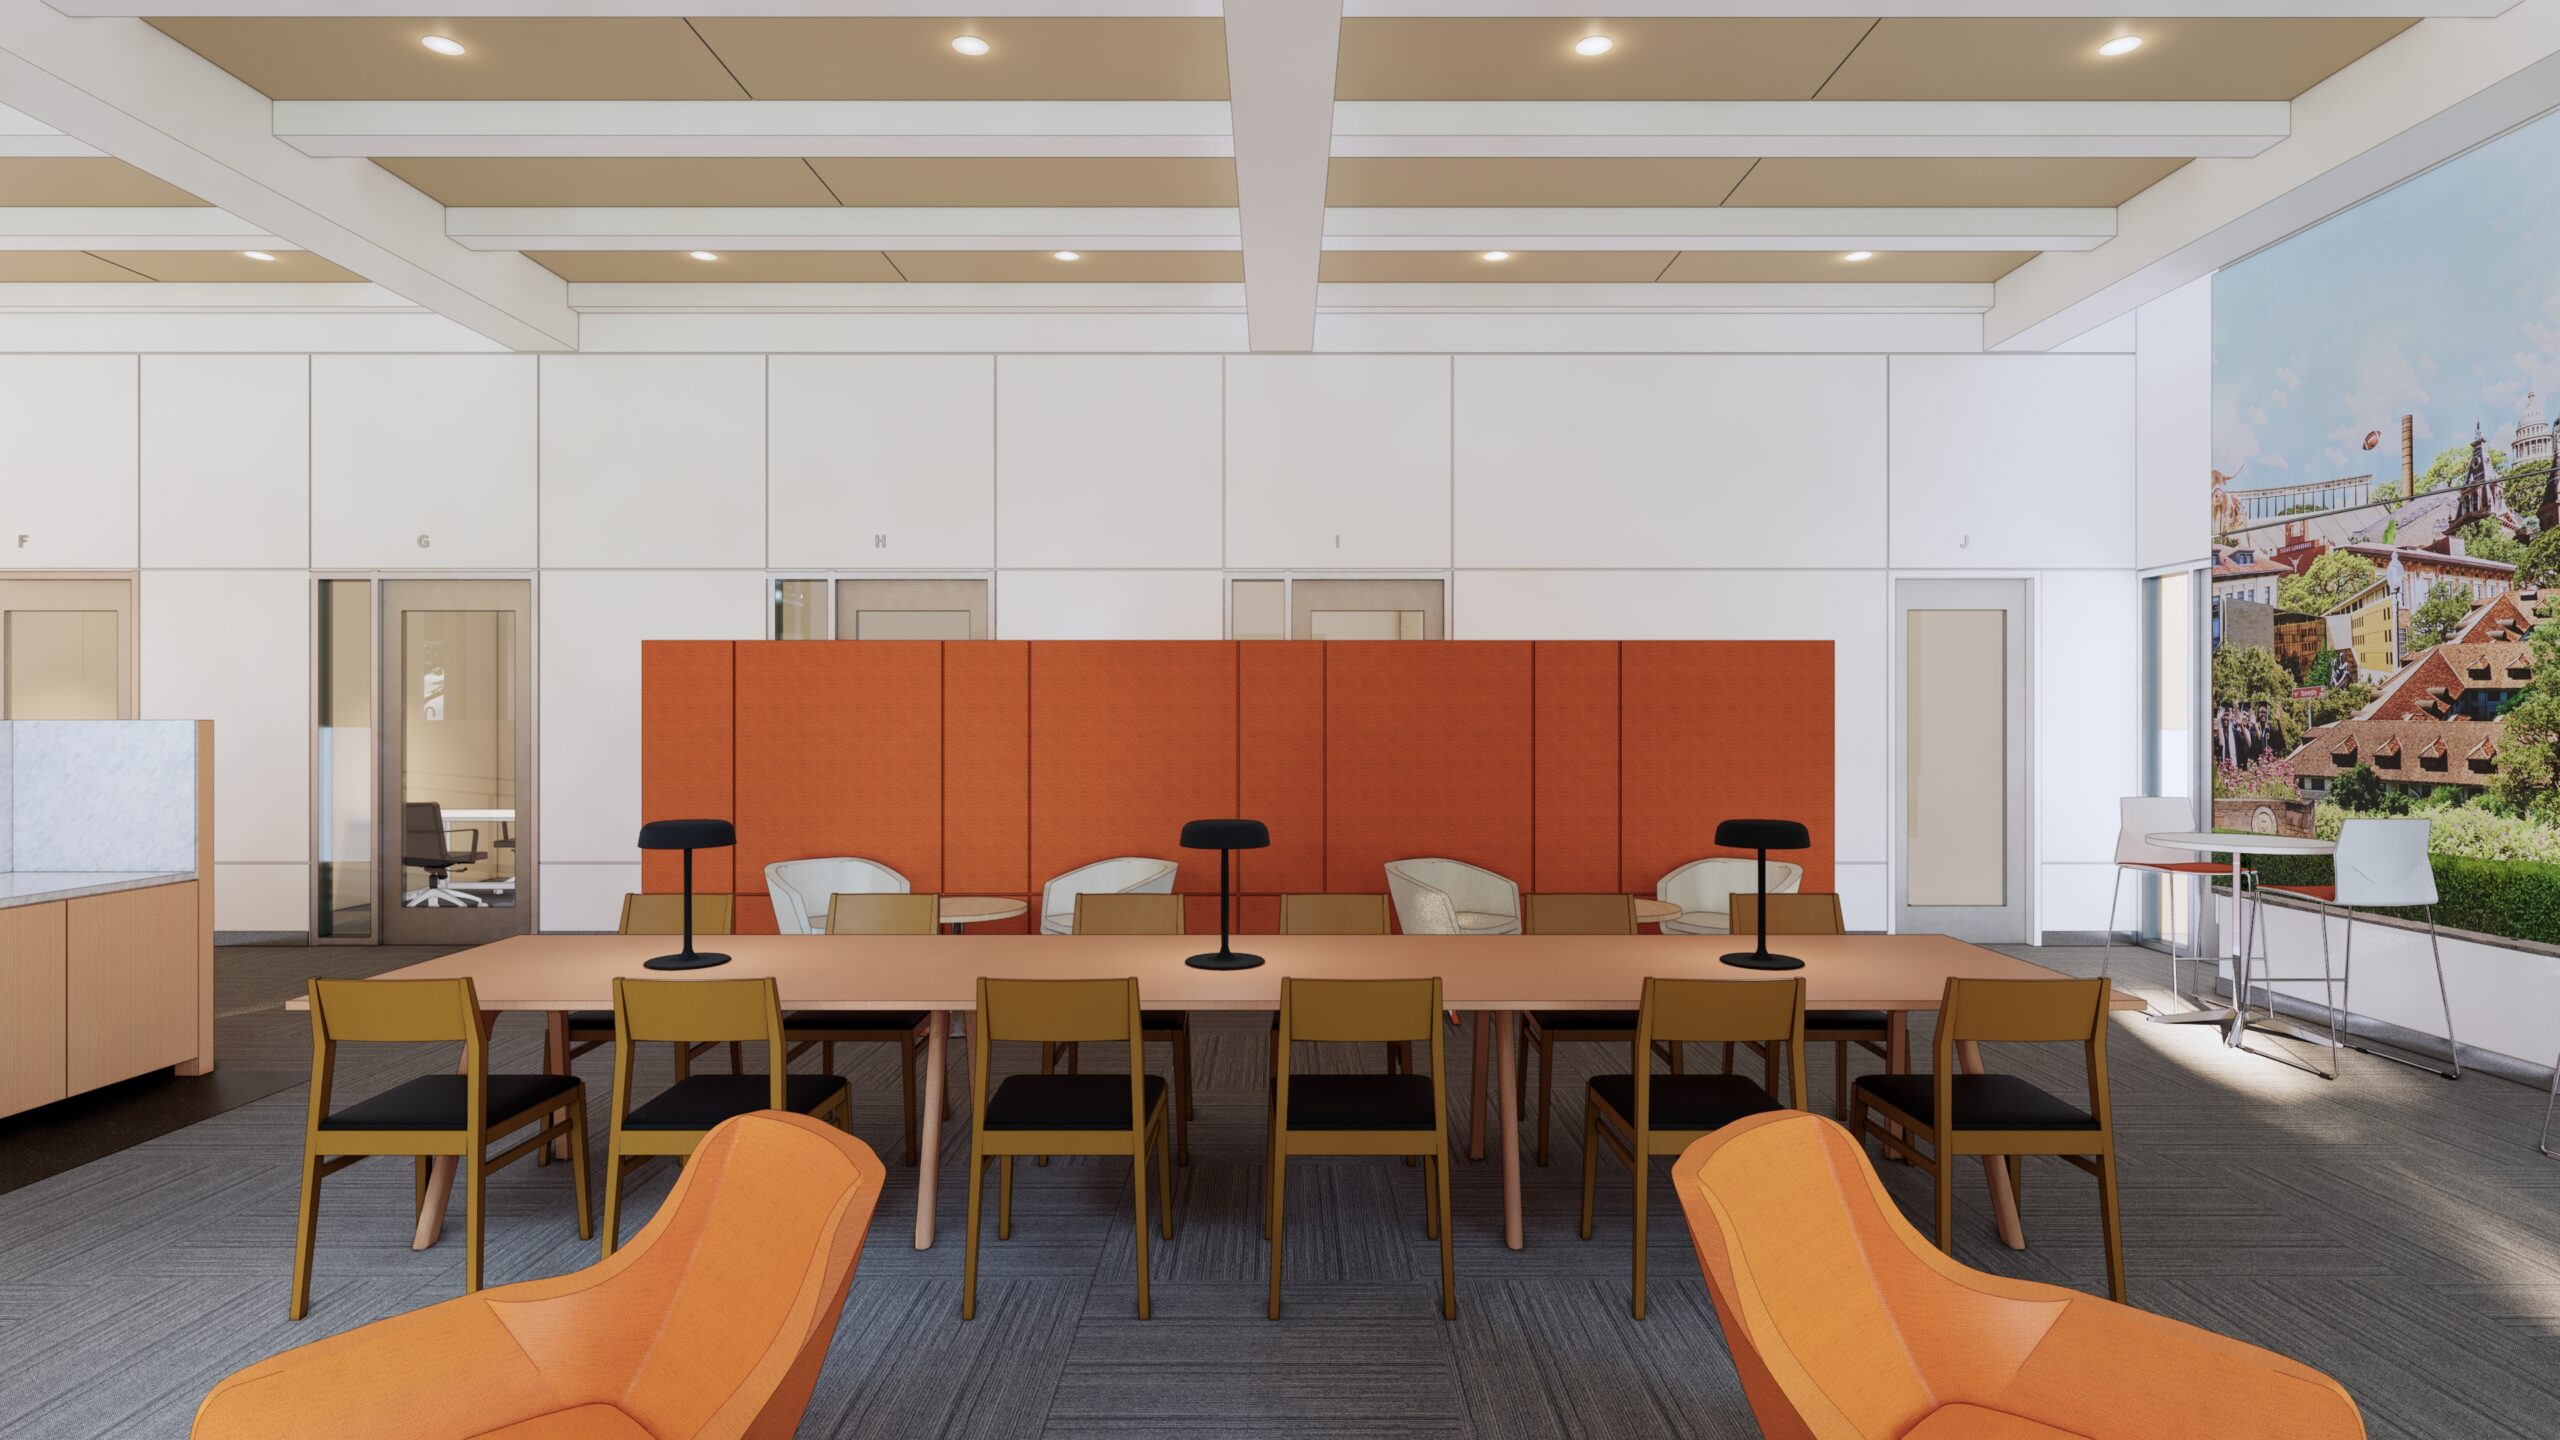 rendering of University of Texas financial wellness center with long table (horizontally) in middle of open space room and small individual seating and tables behind and in foreground, mural on right wall and doors for office rooms along wall behind partition in background